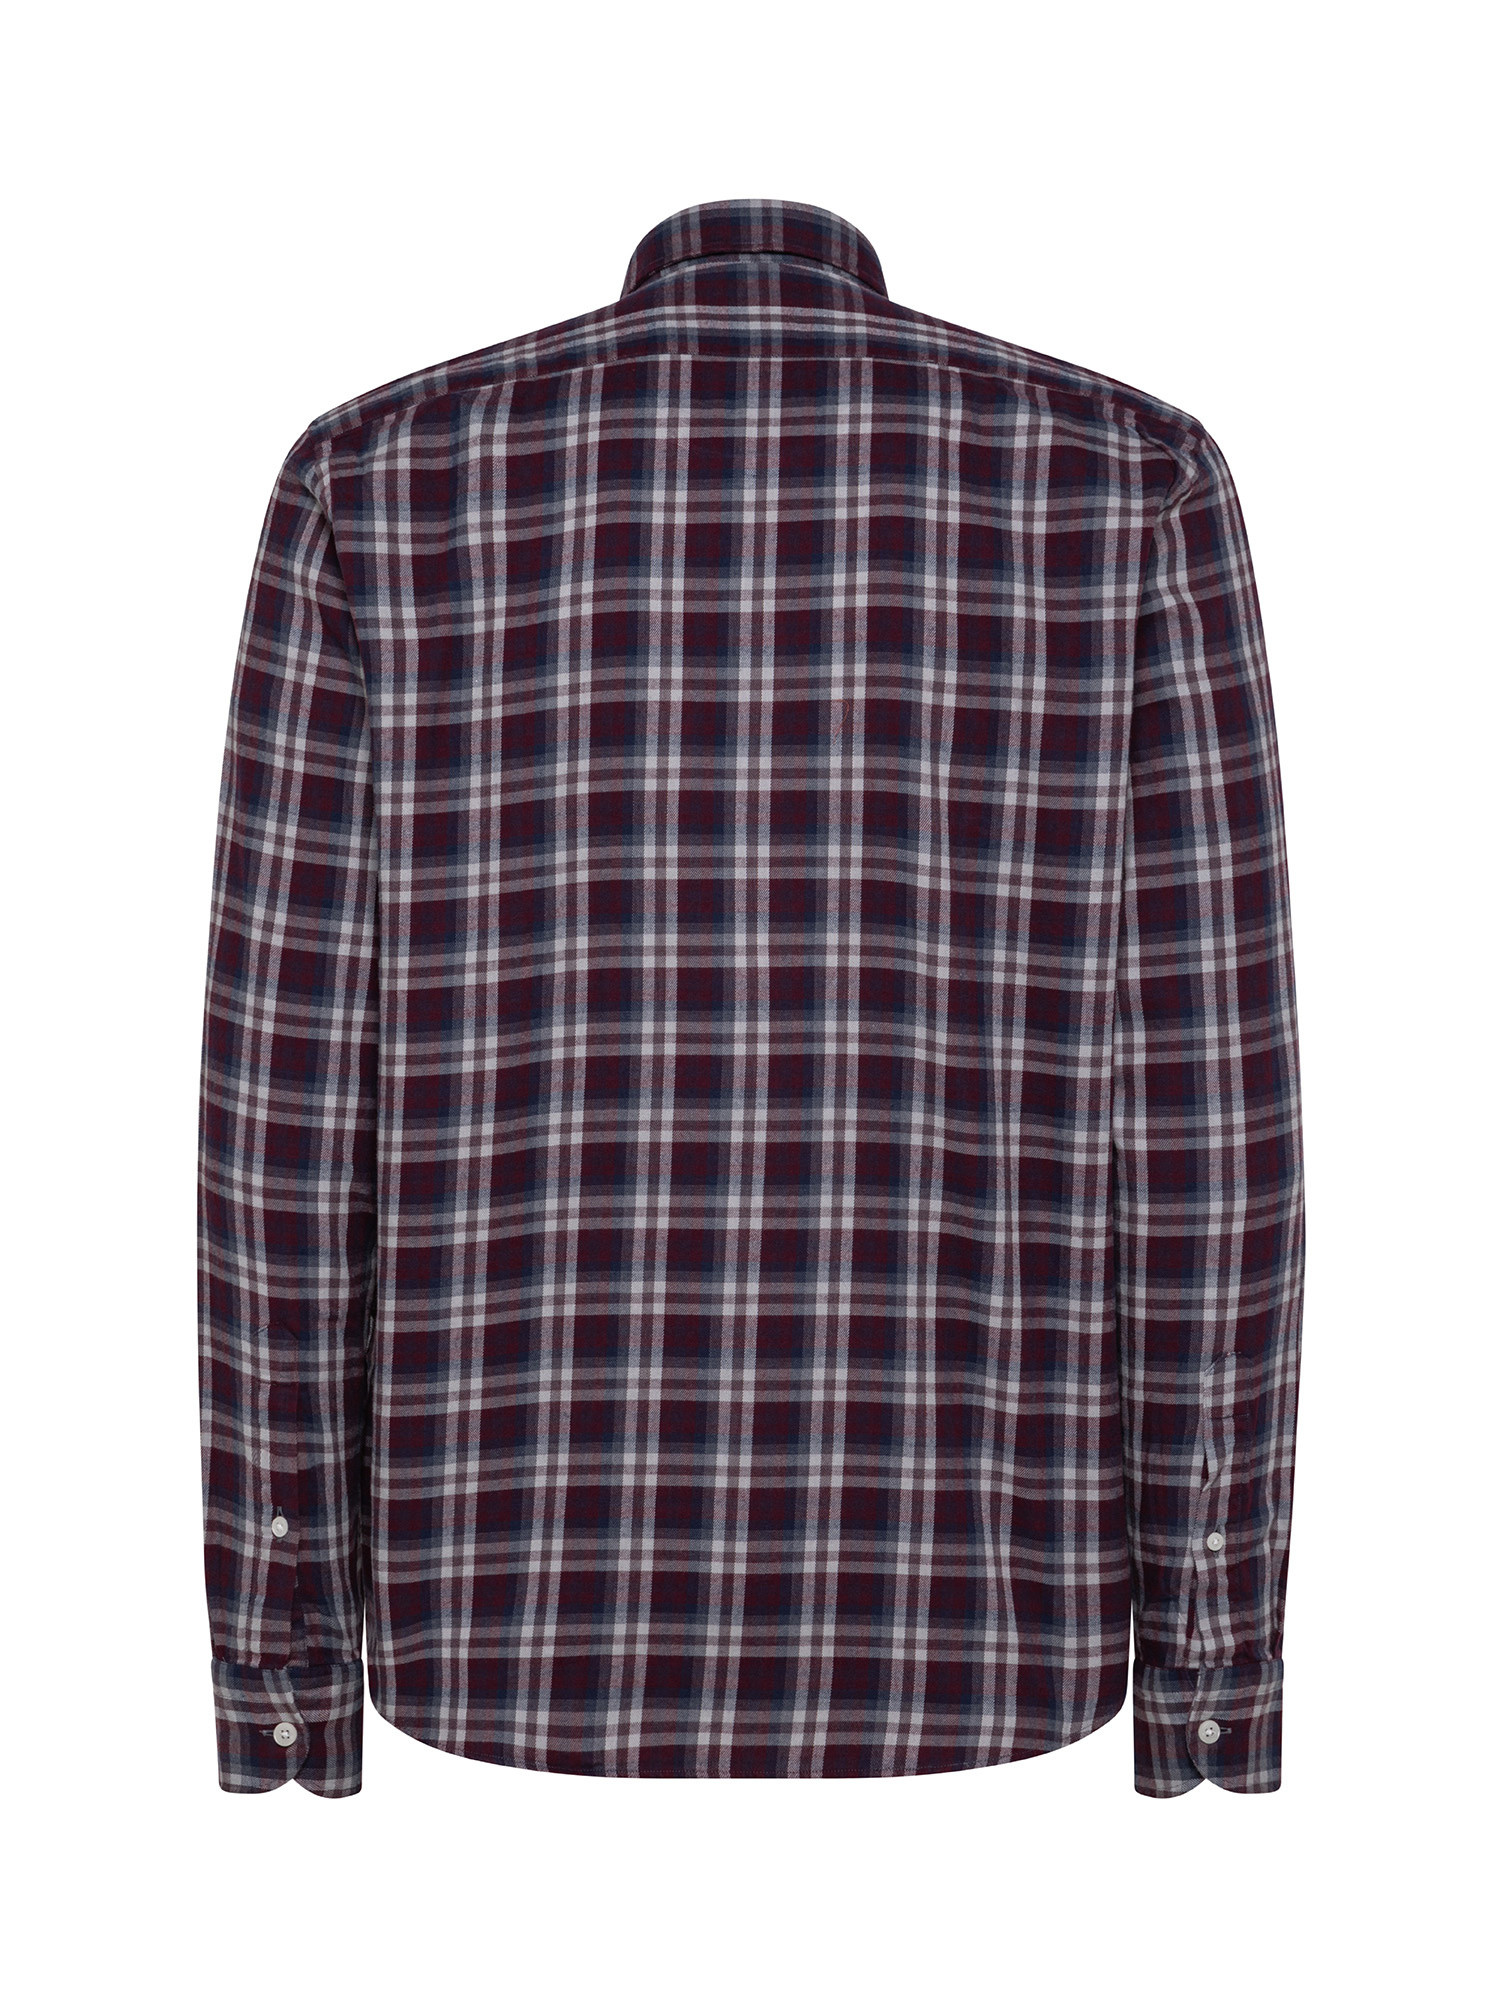 Tailor fit shirt in soft organic cotton flannel, Red, large image number 1